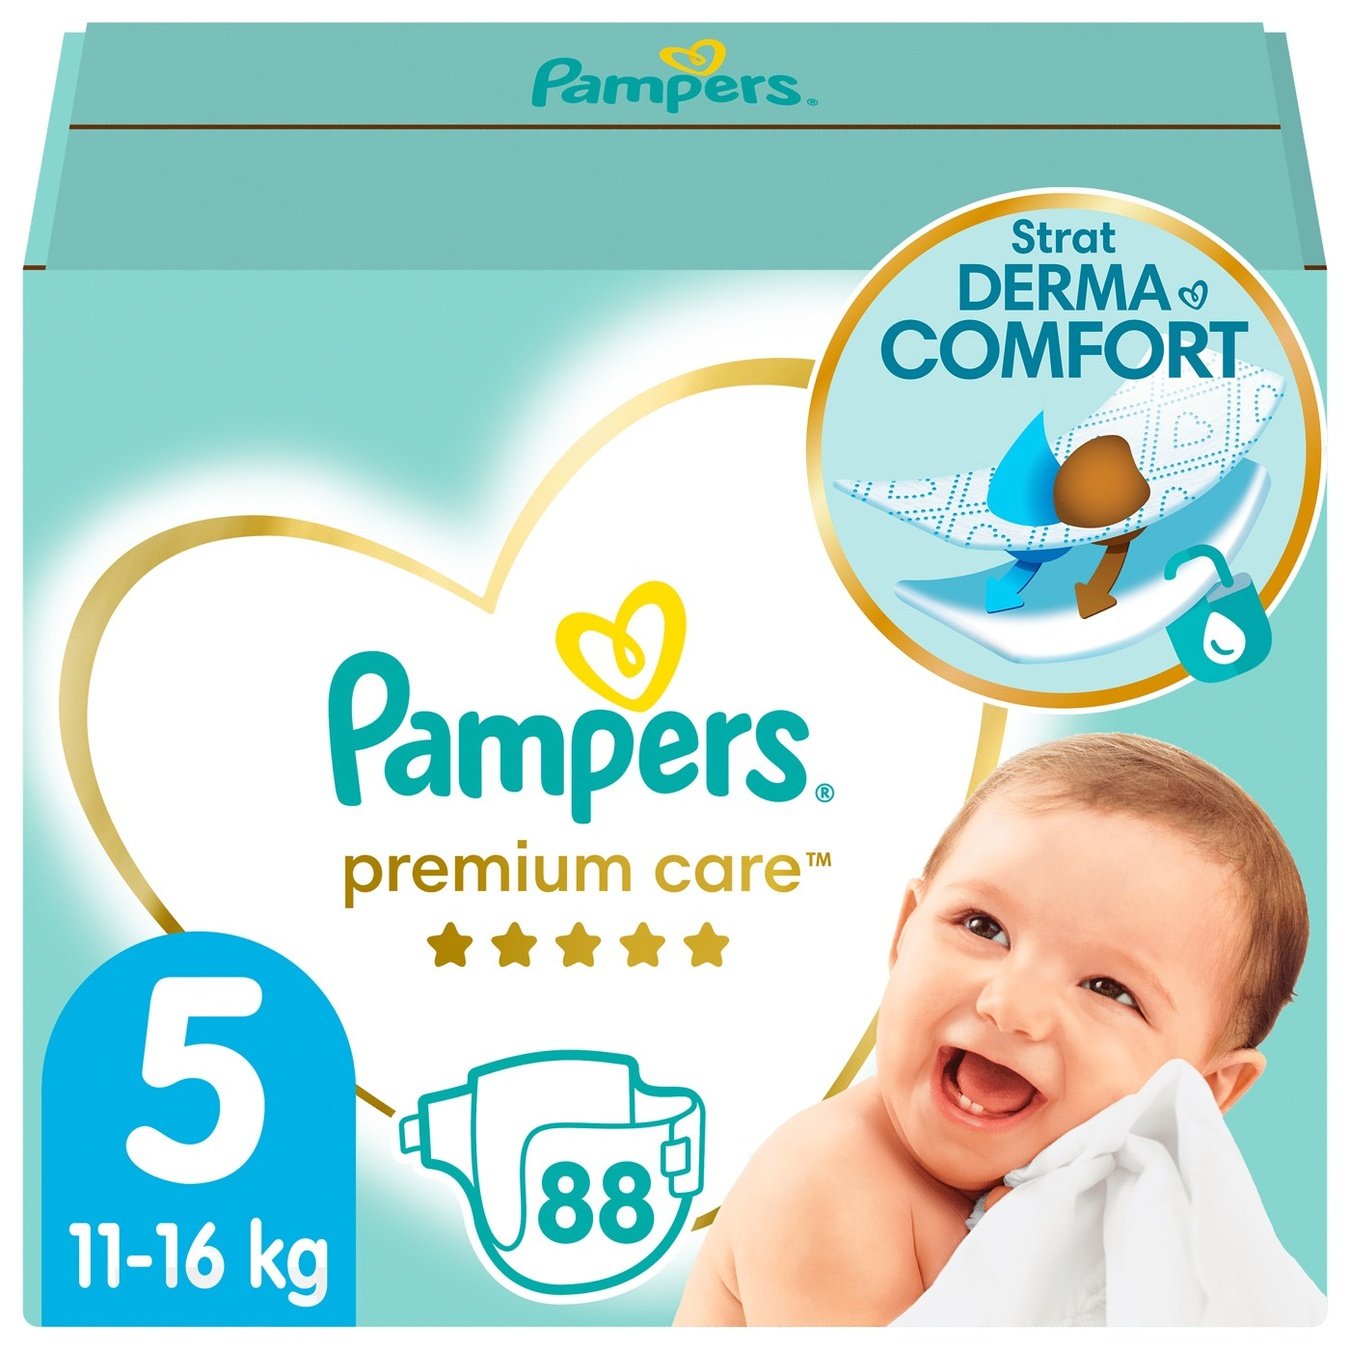 procer pampers